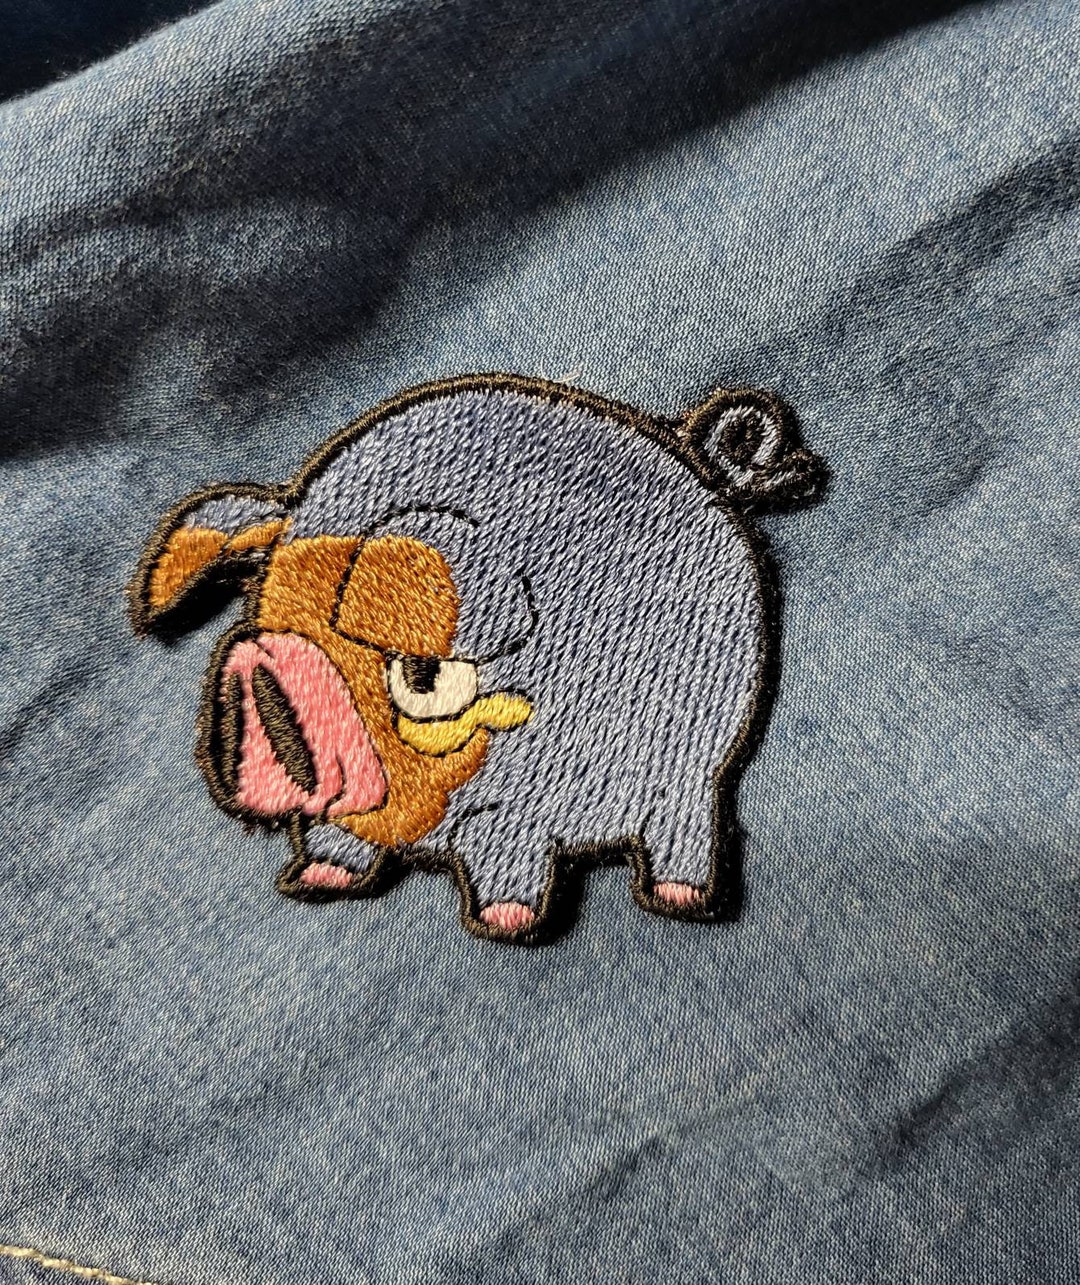 Lechonk Embroidery Patch - Etsy